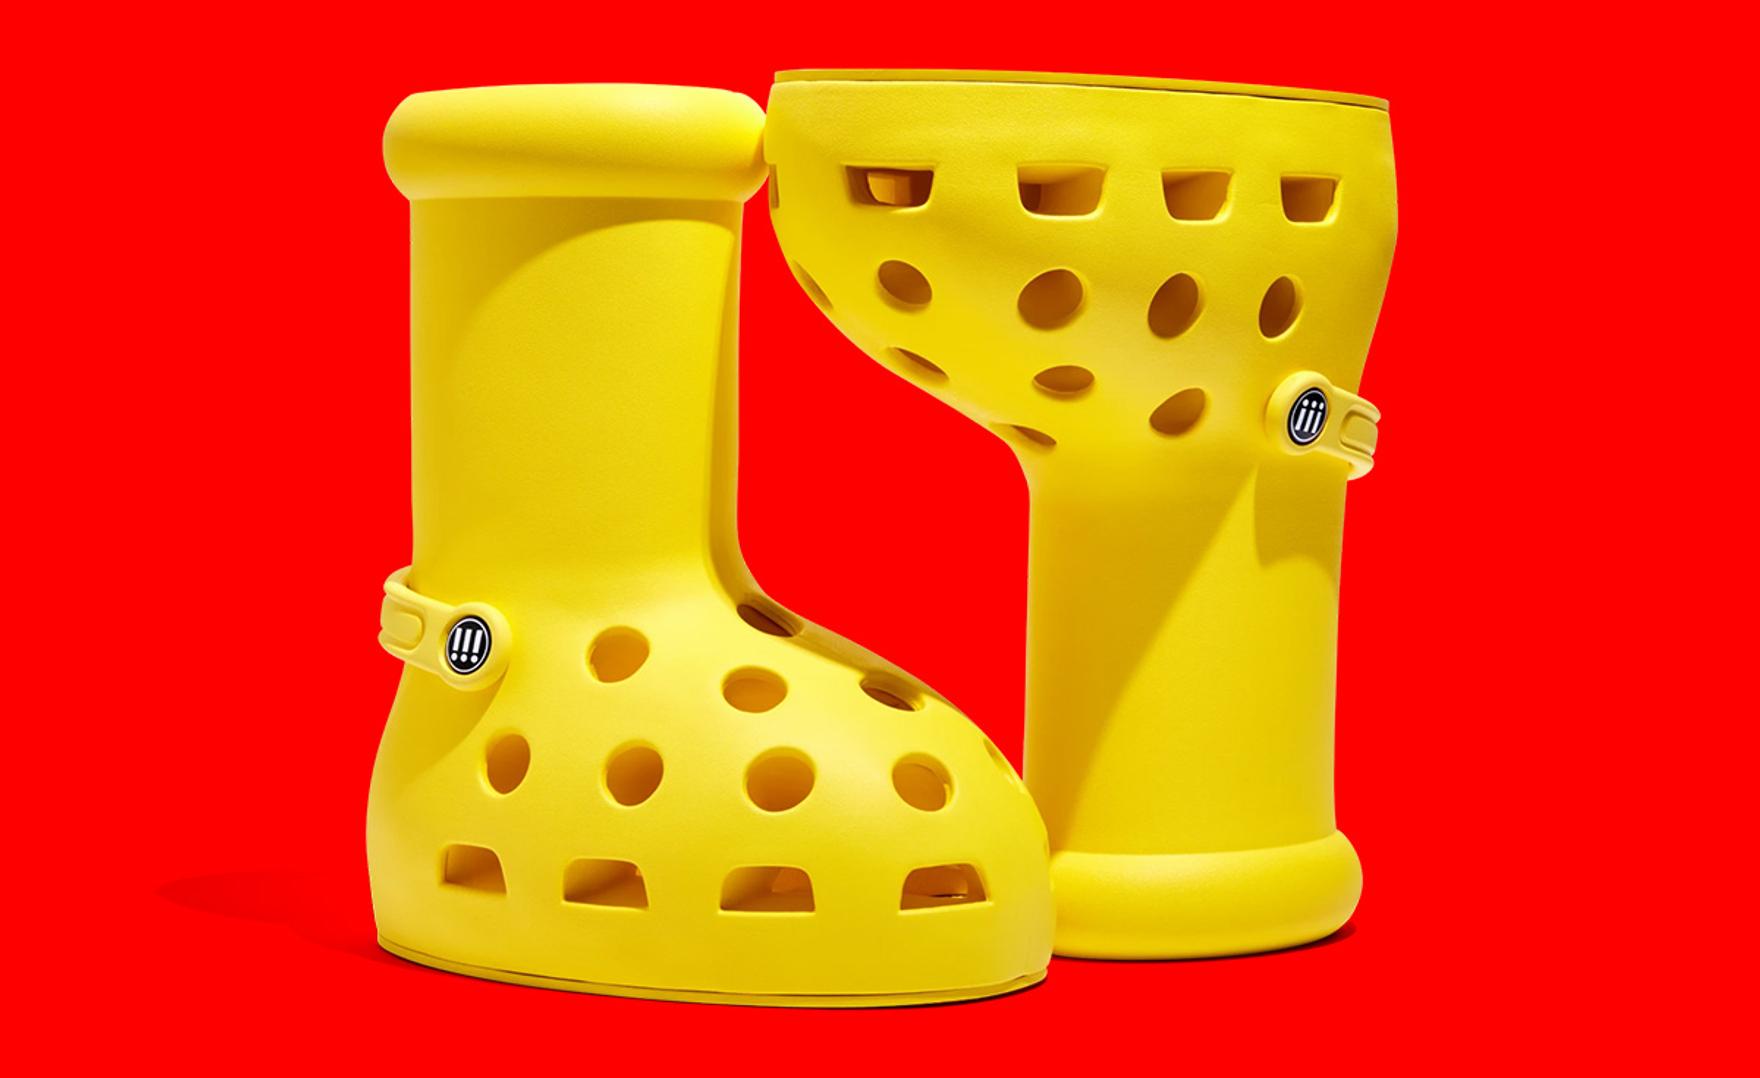 The Crocs x MSCHF Big Yellow Boot Gets a Release Date